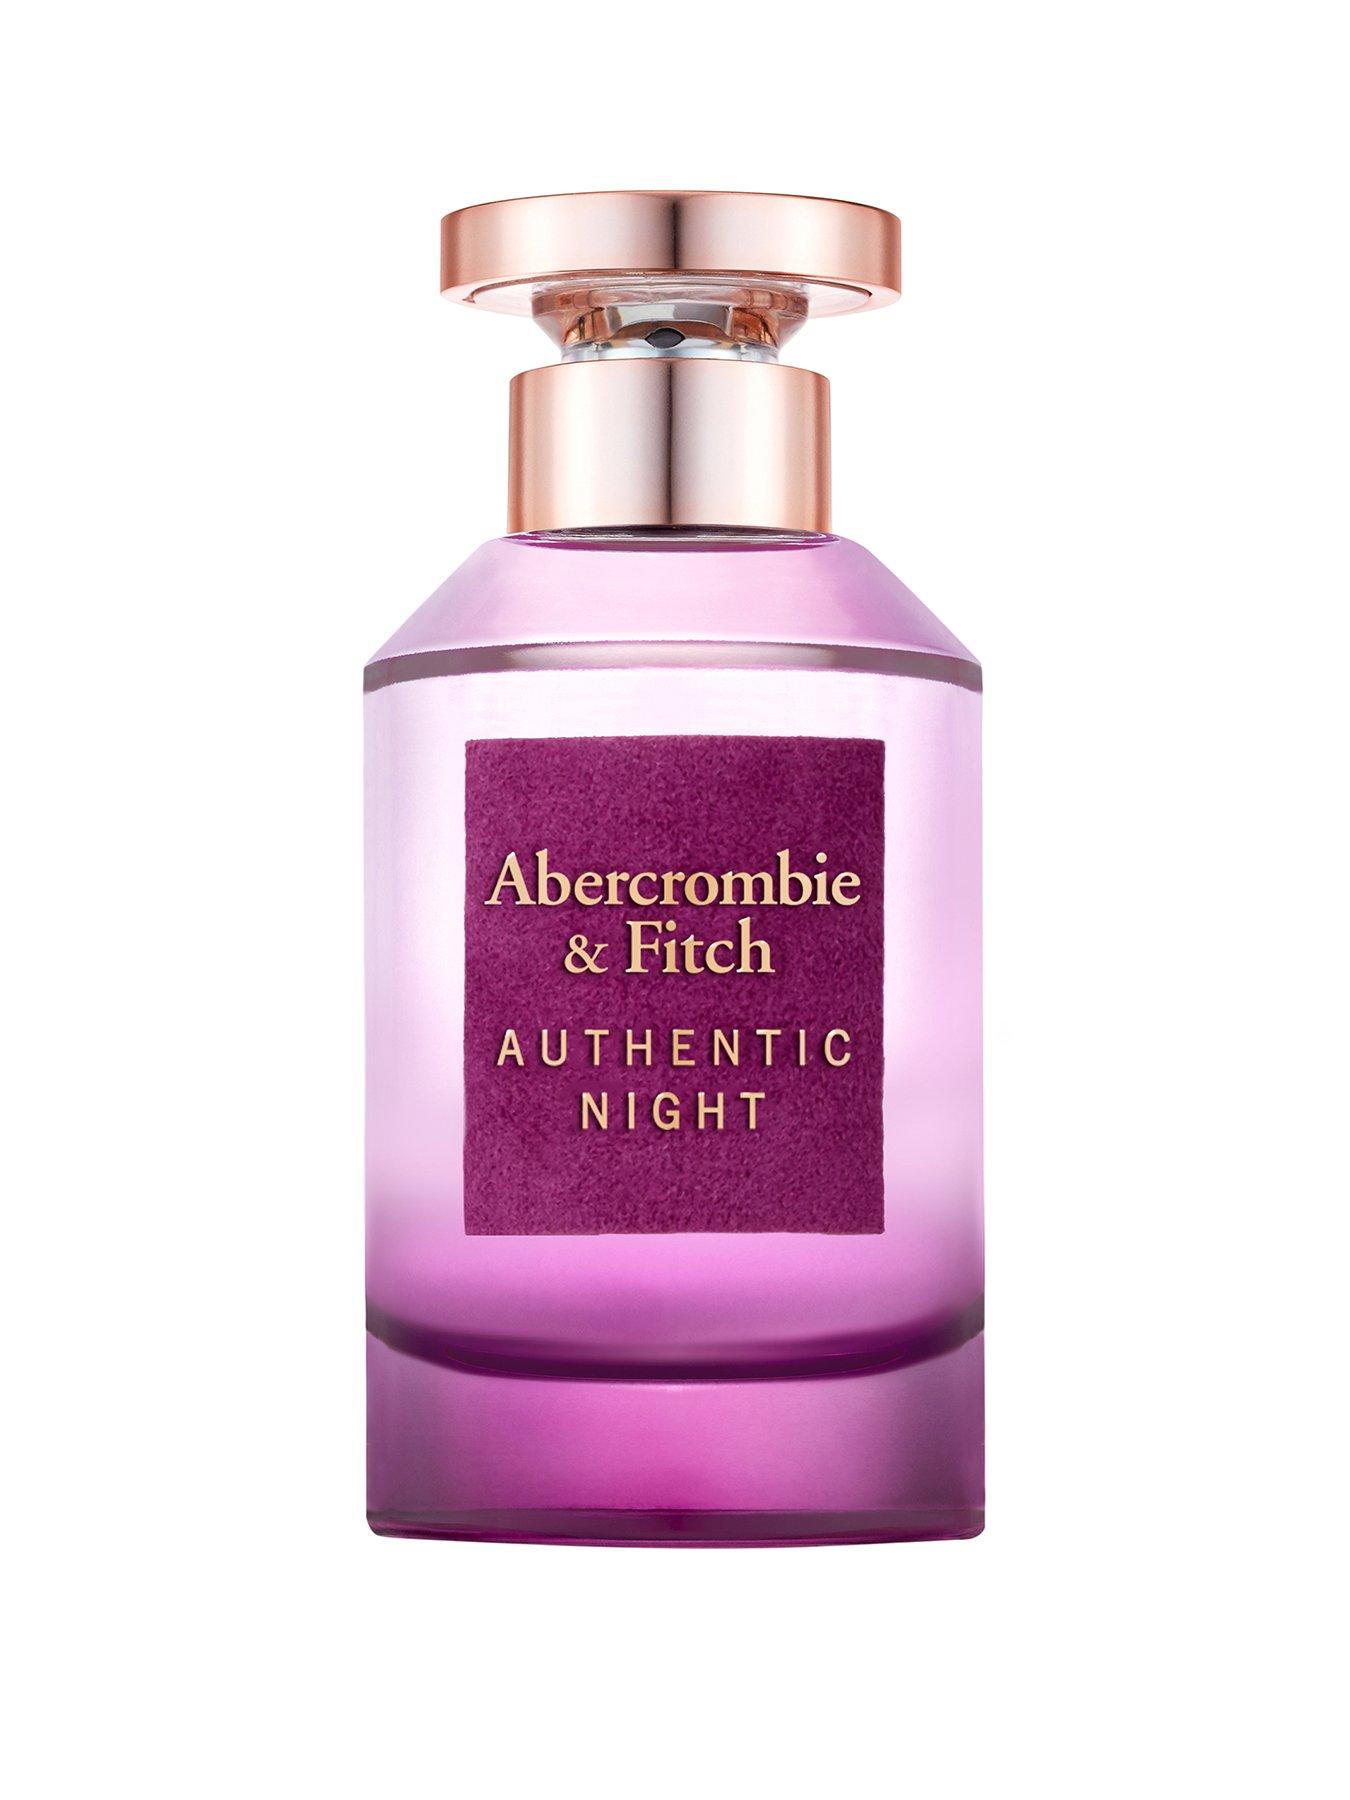 Abercrombie & Fitch by Abercrombie & Fitch